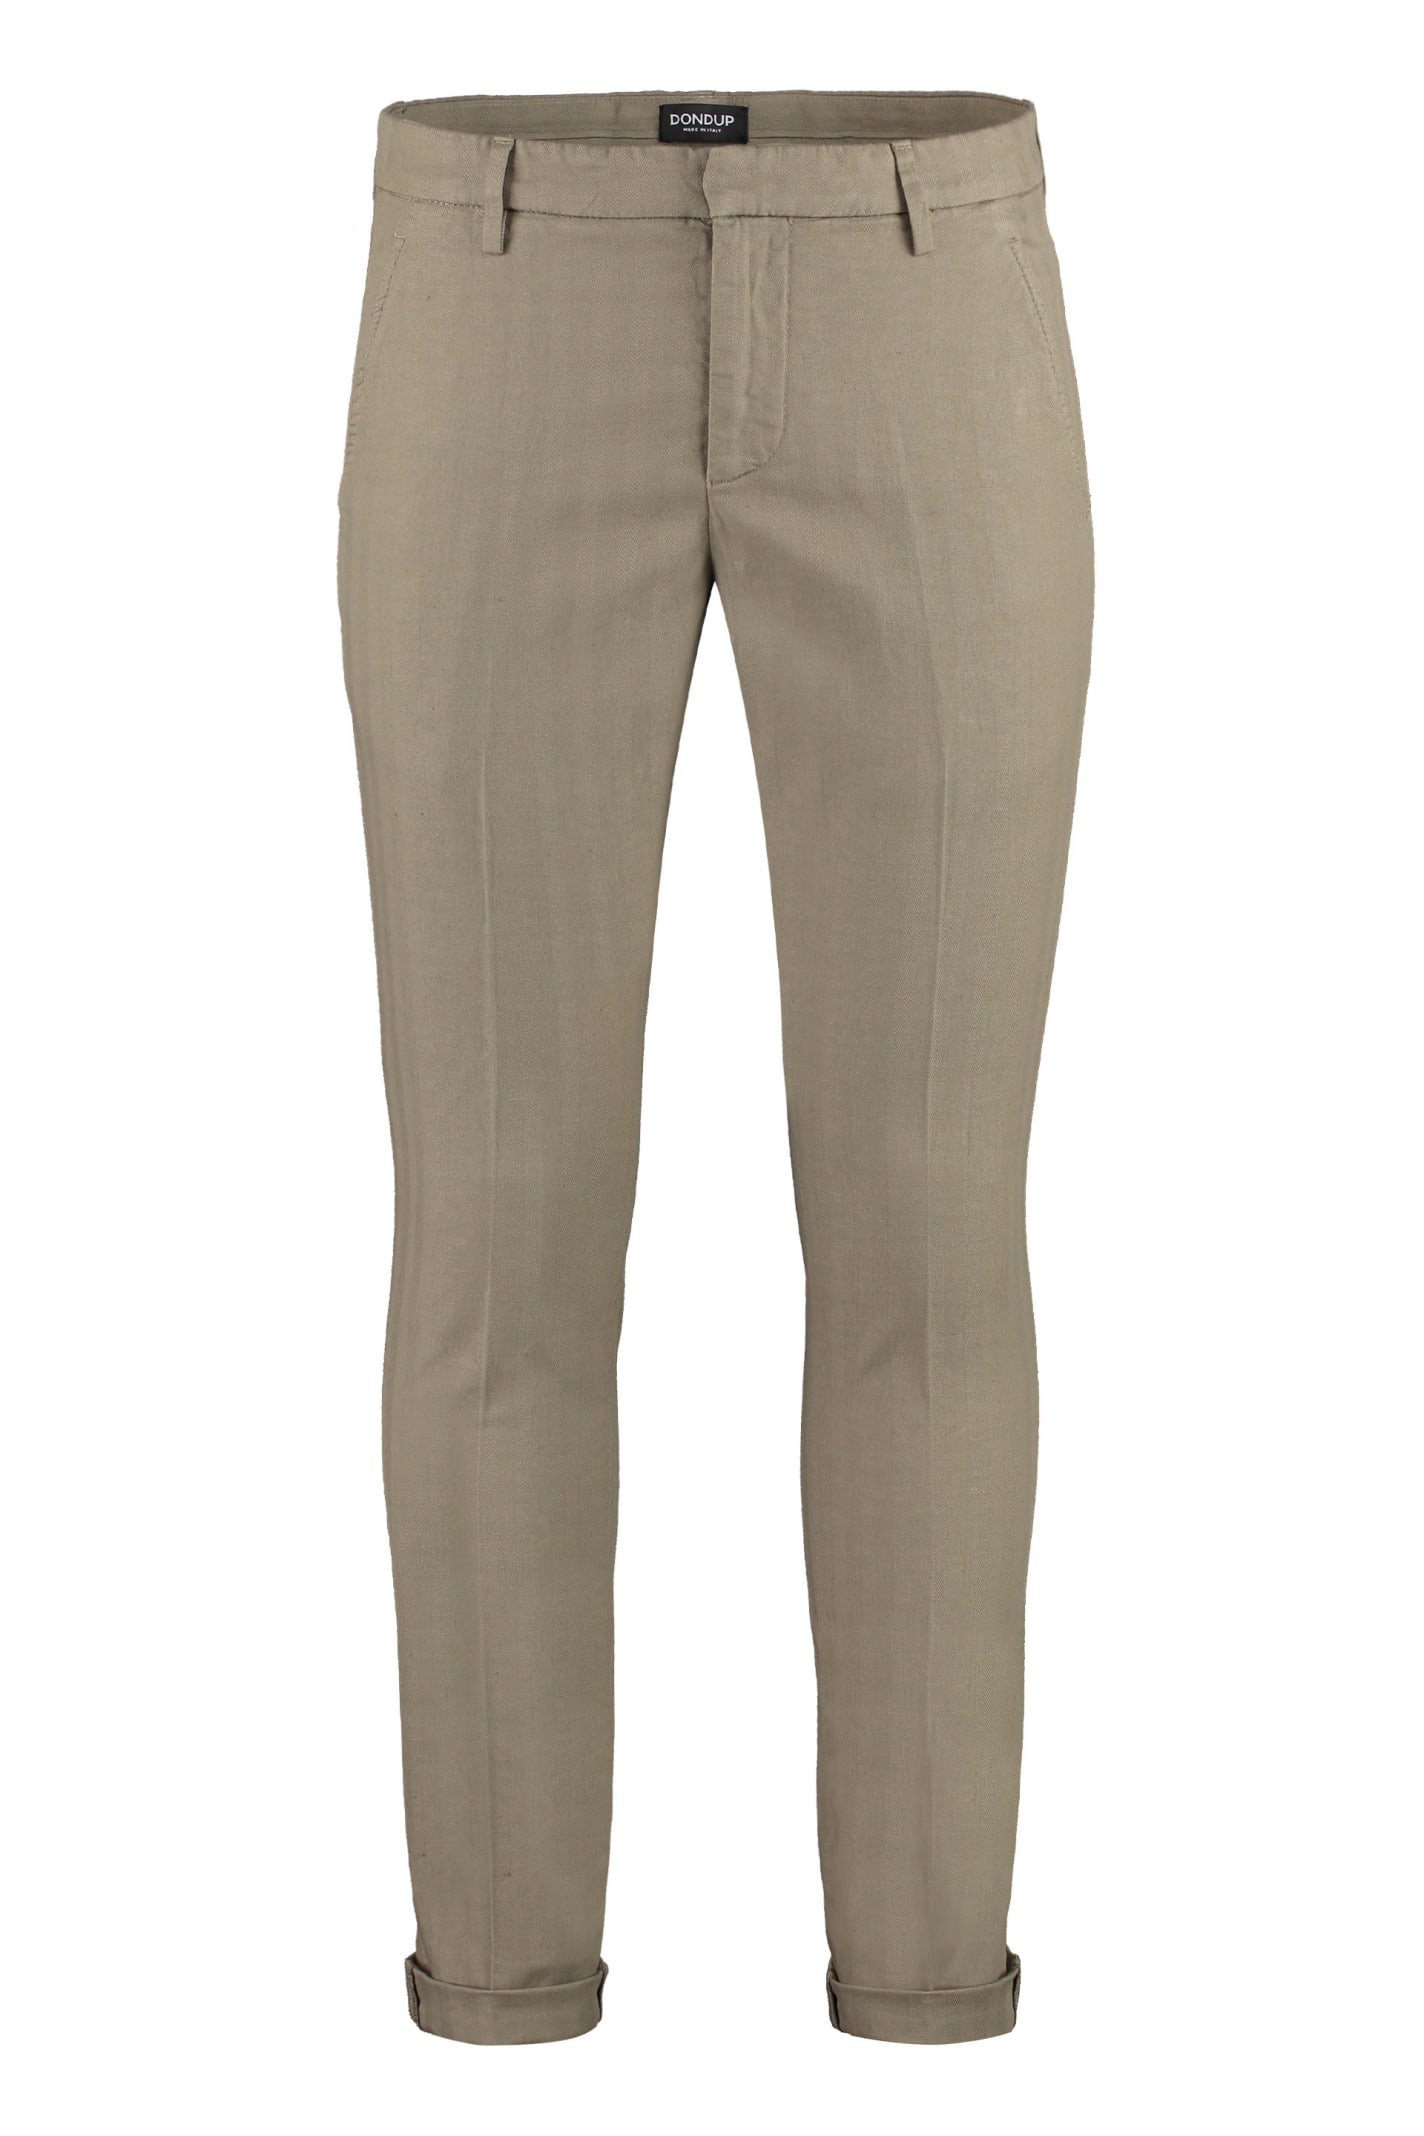 Shop Dondup Cotton Chino Trousers In Turtledove